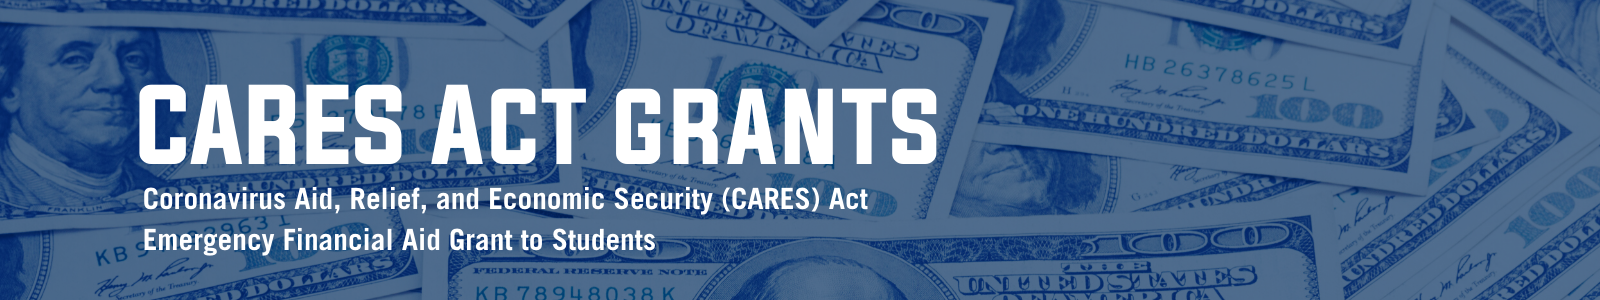 Cares Act Banner